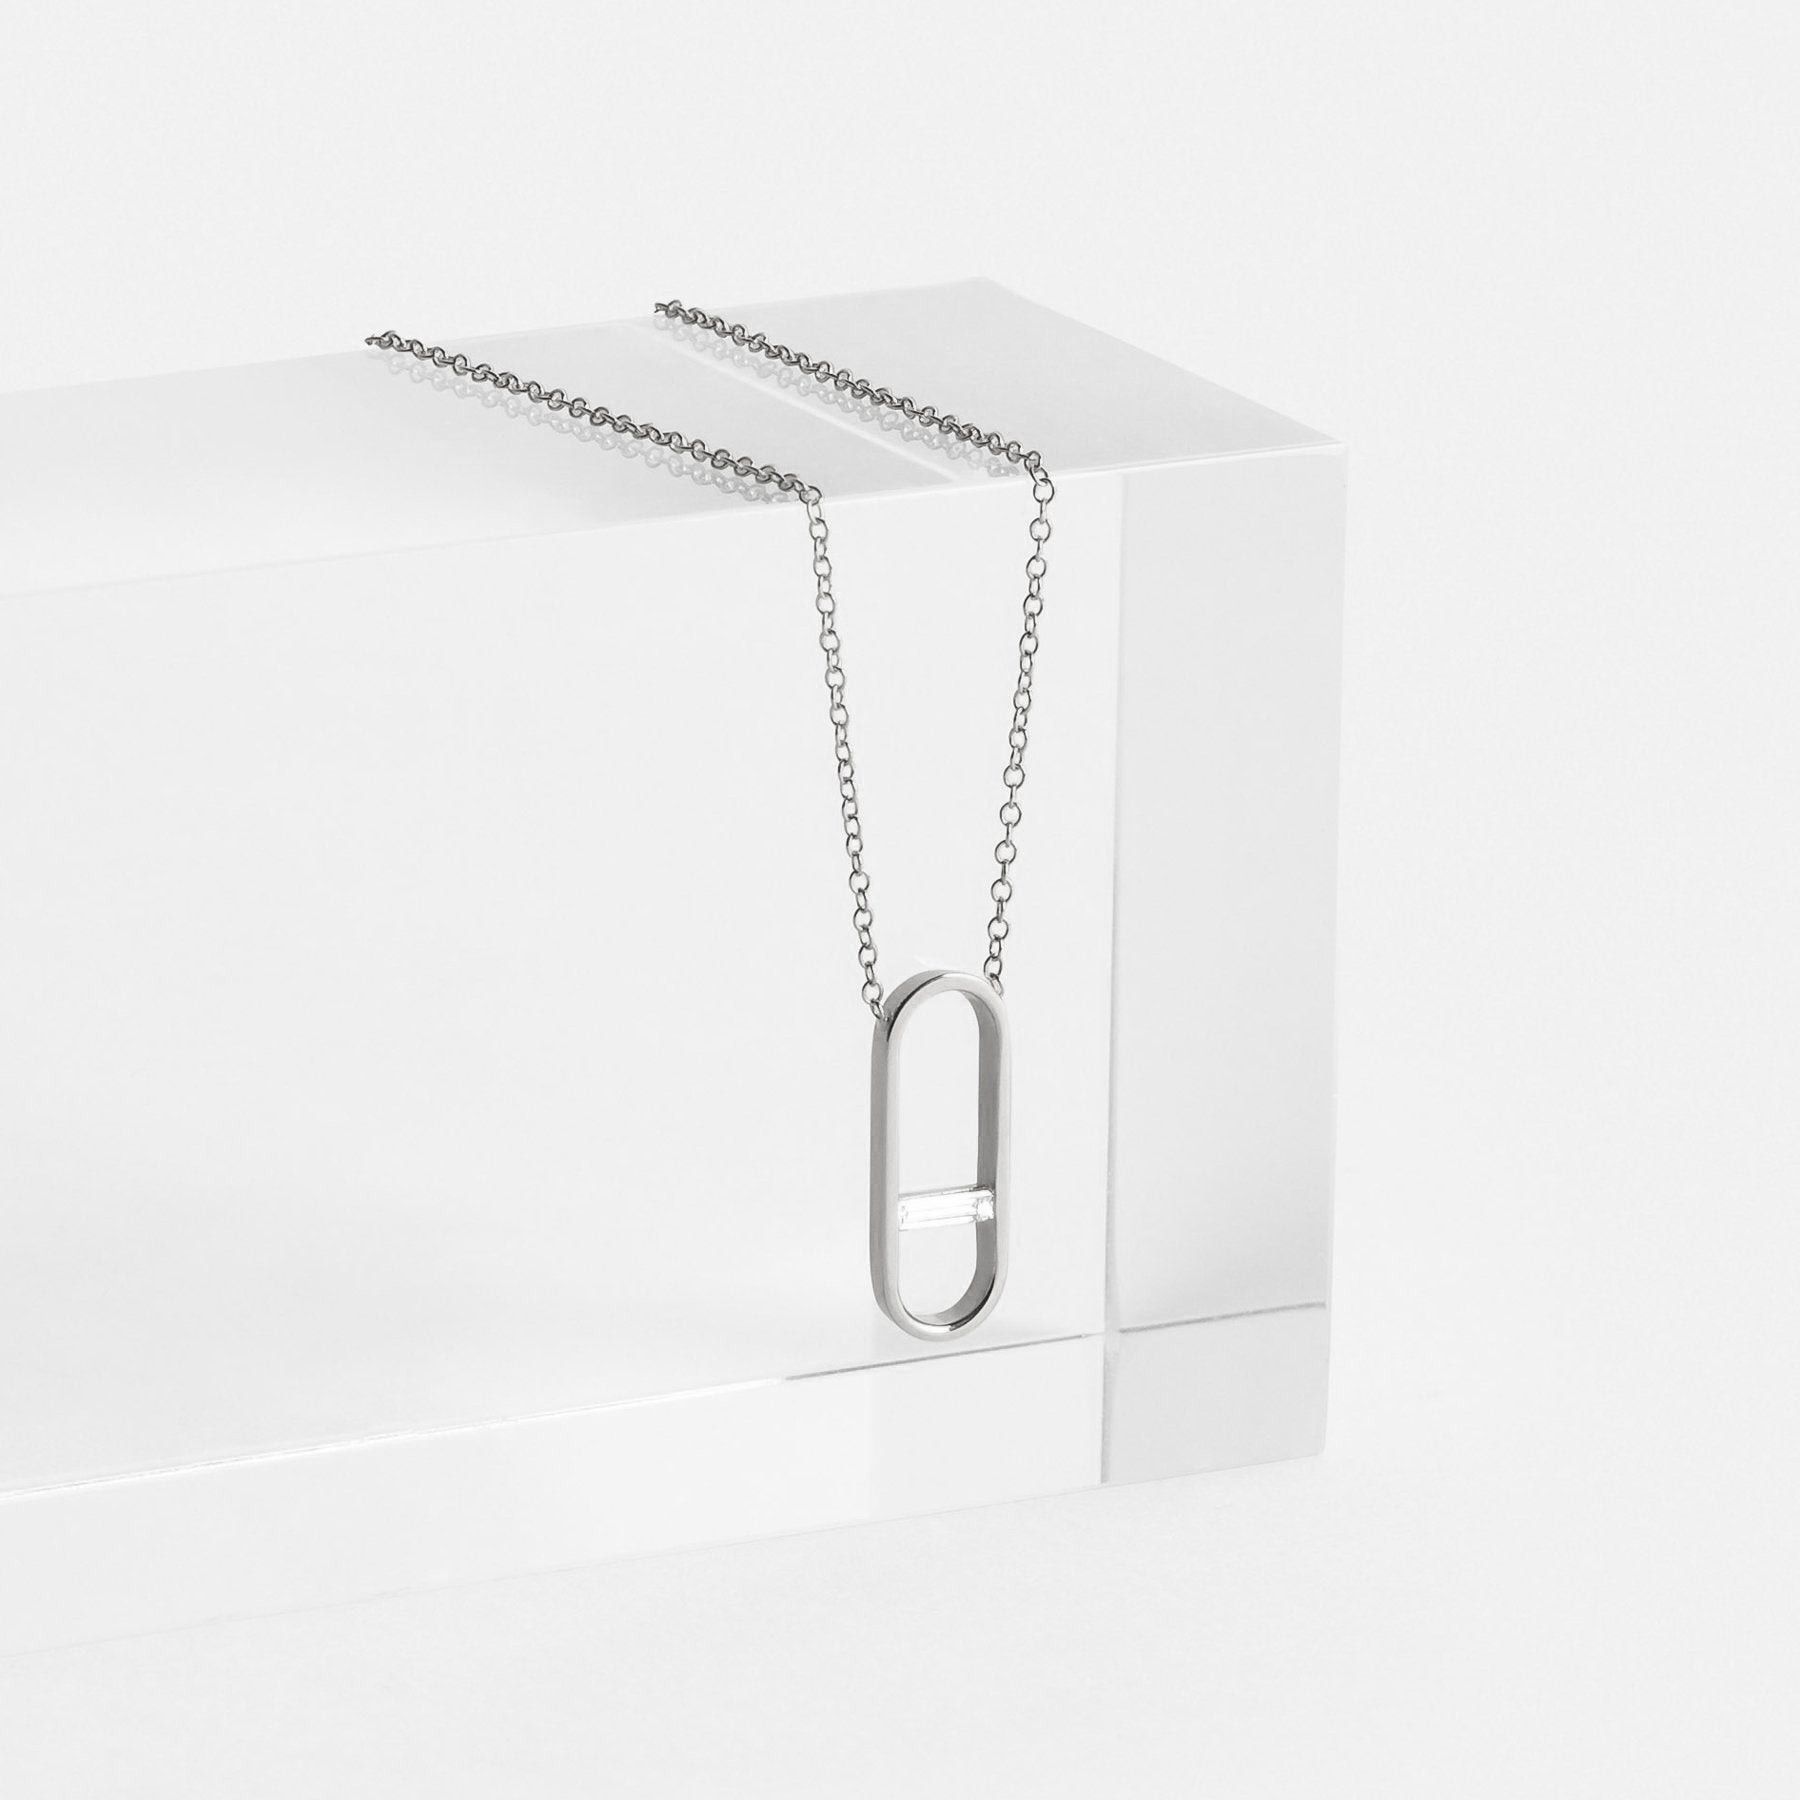 Ranga Alternative Necklace in 14k White Gold set with White Baguette Diamond By SHW Fine Jewelry NYC